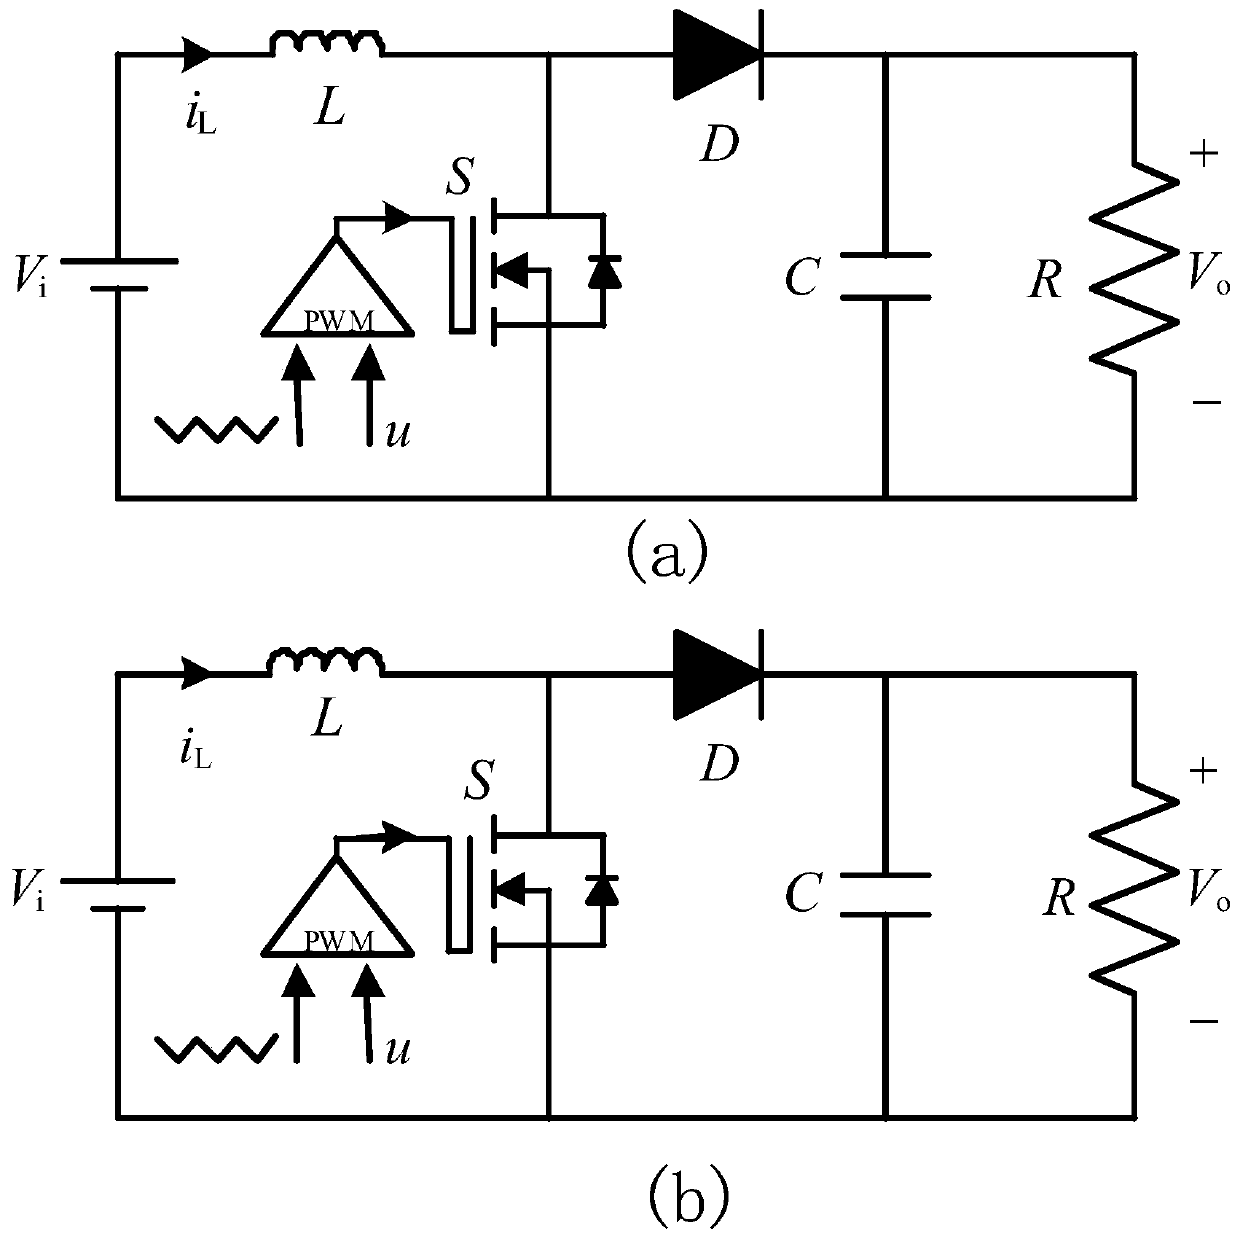 Dynamic sliding mode voltage control method for DC-DC boost converter based on interval type-II adaptive fuzzy neural network